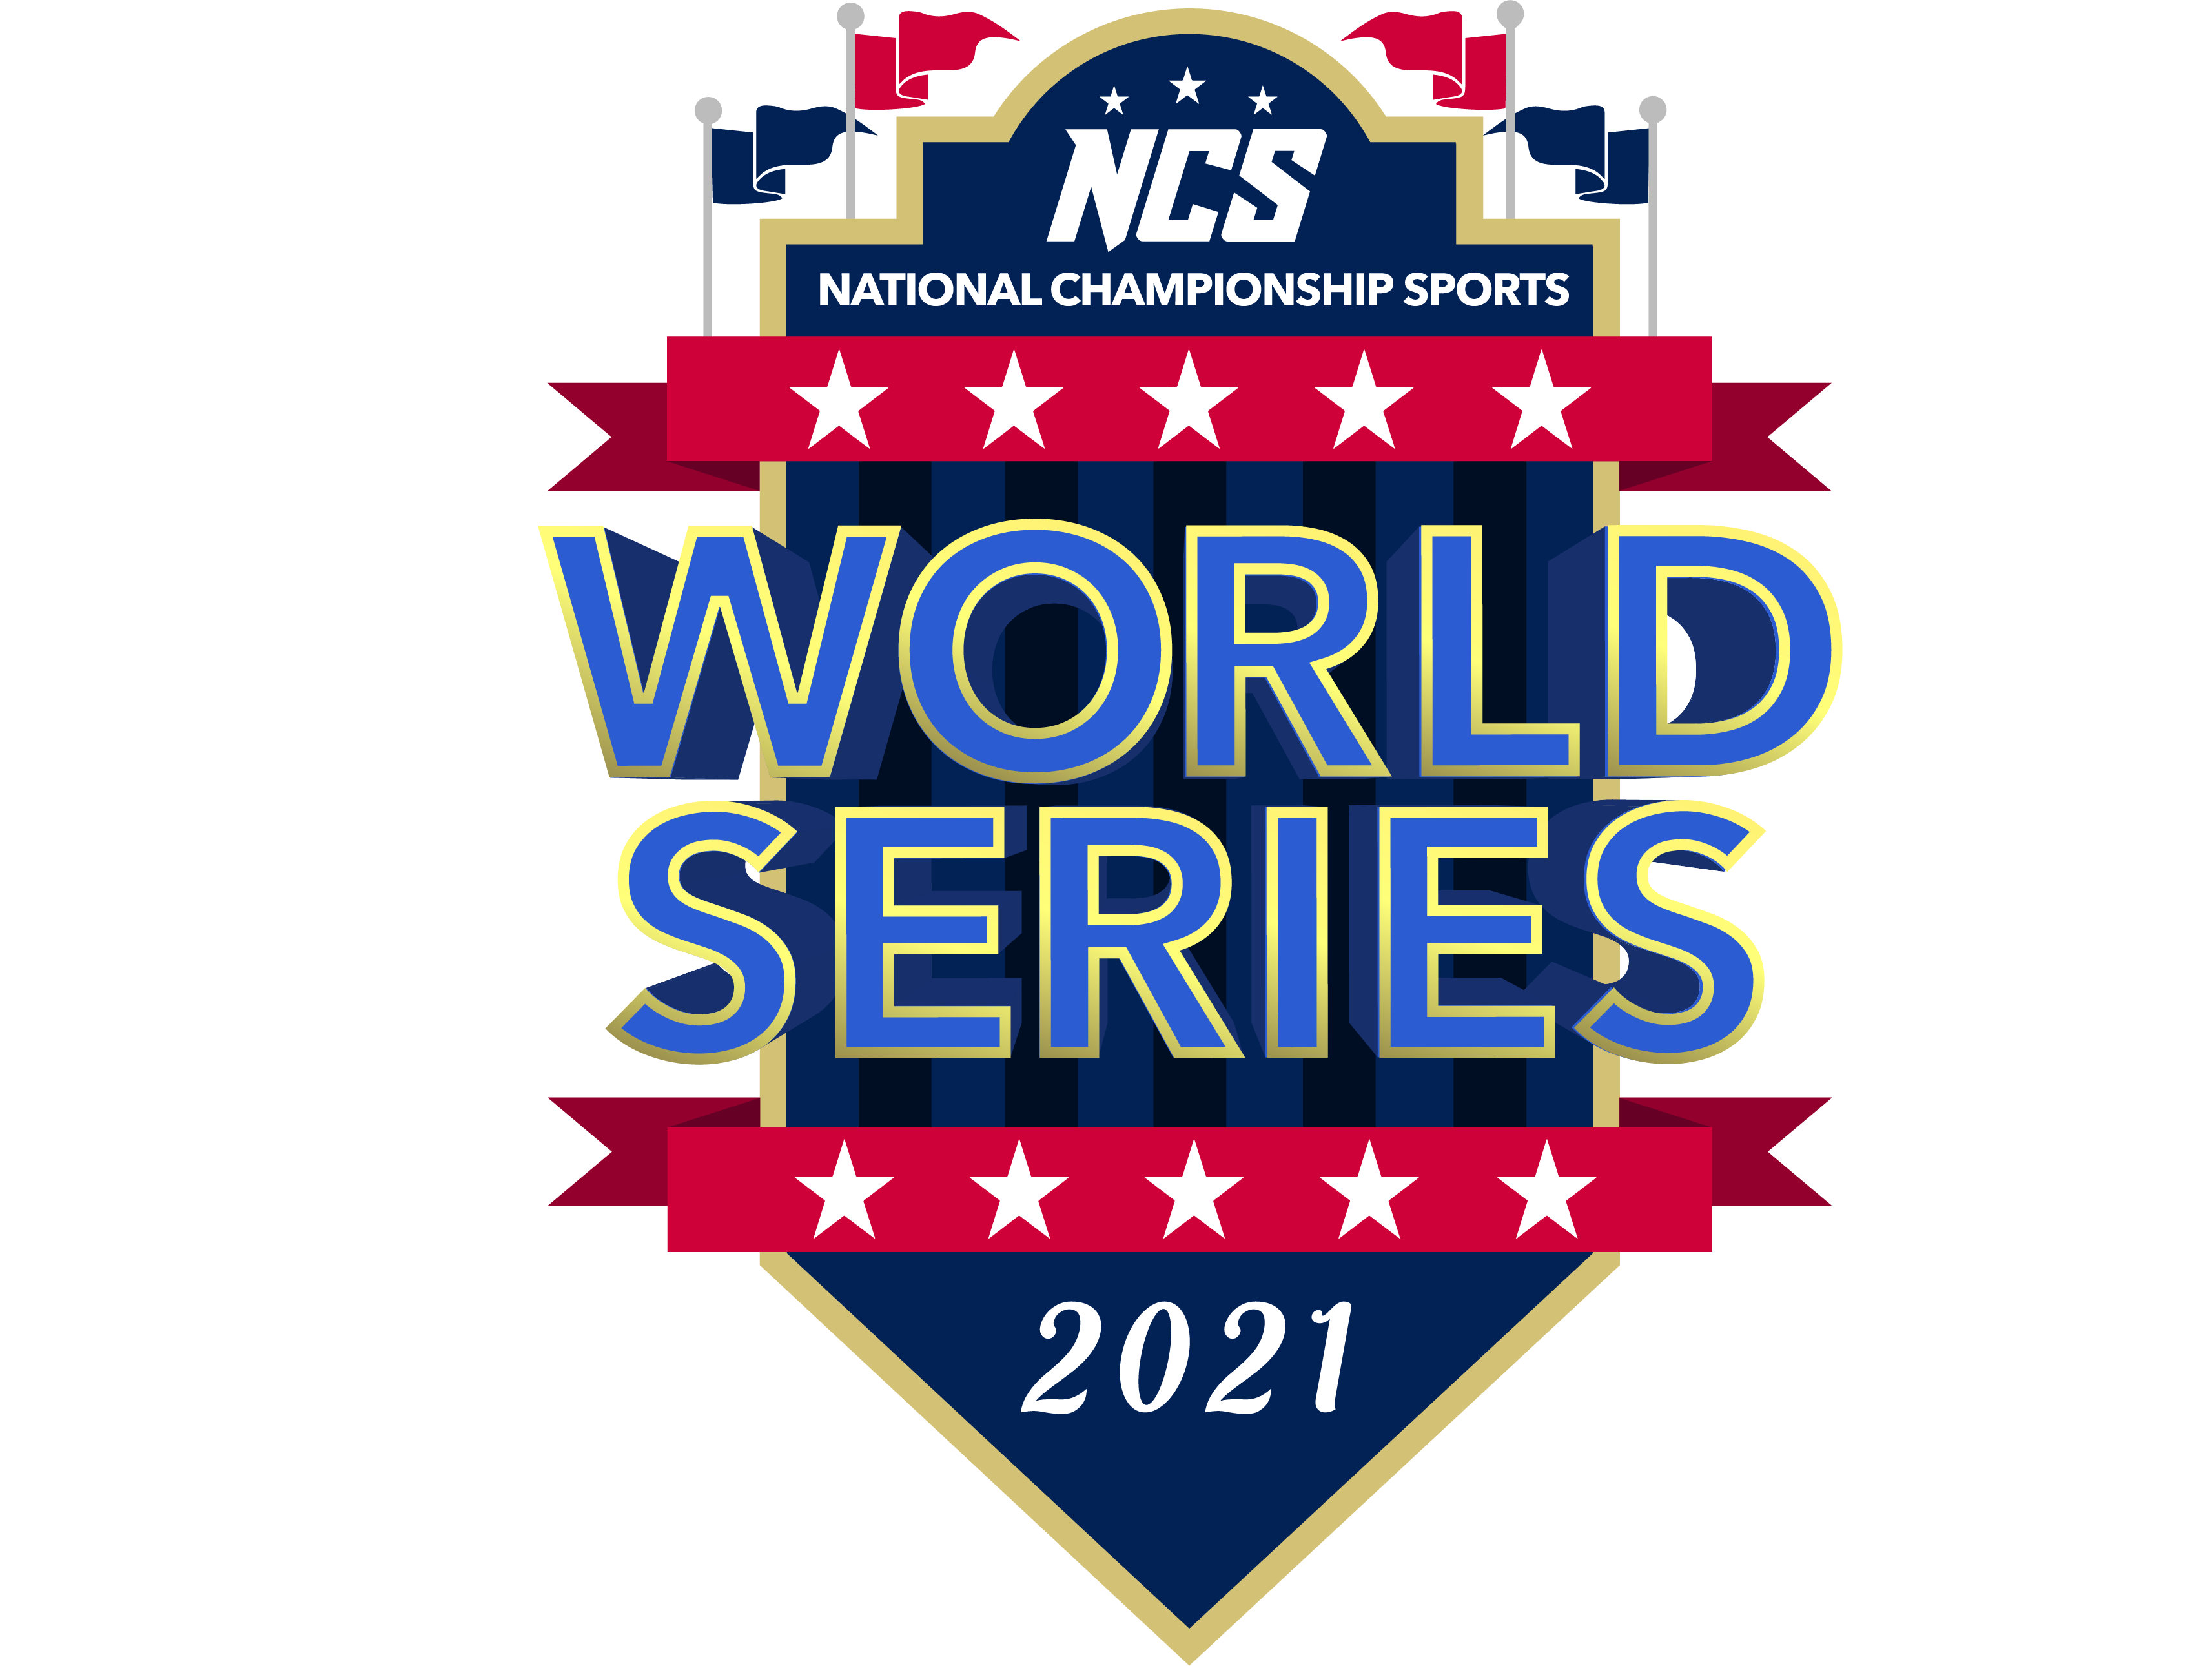 https://playncs.blob.core.windows.net/documents/images/Events/Logos/1367-ultimate-world-series.png?t=637619655779270000